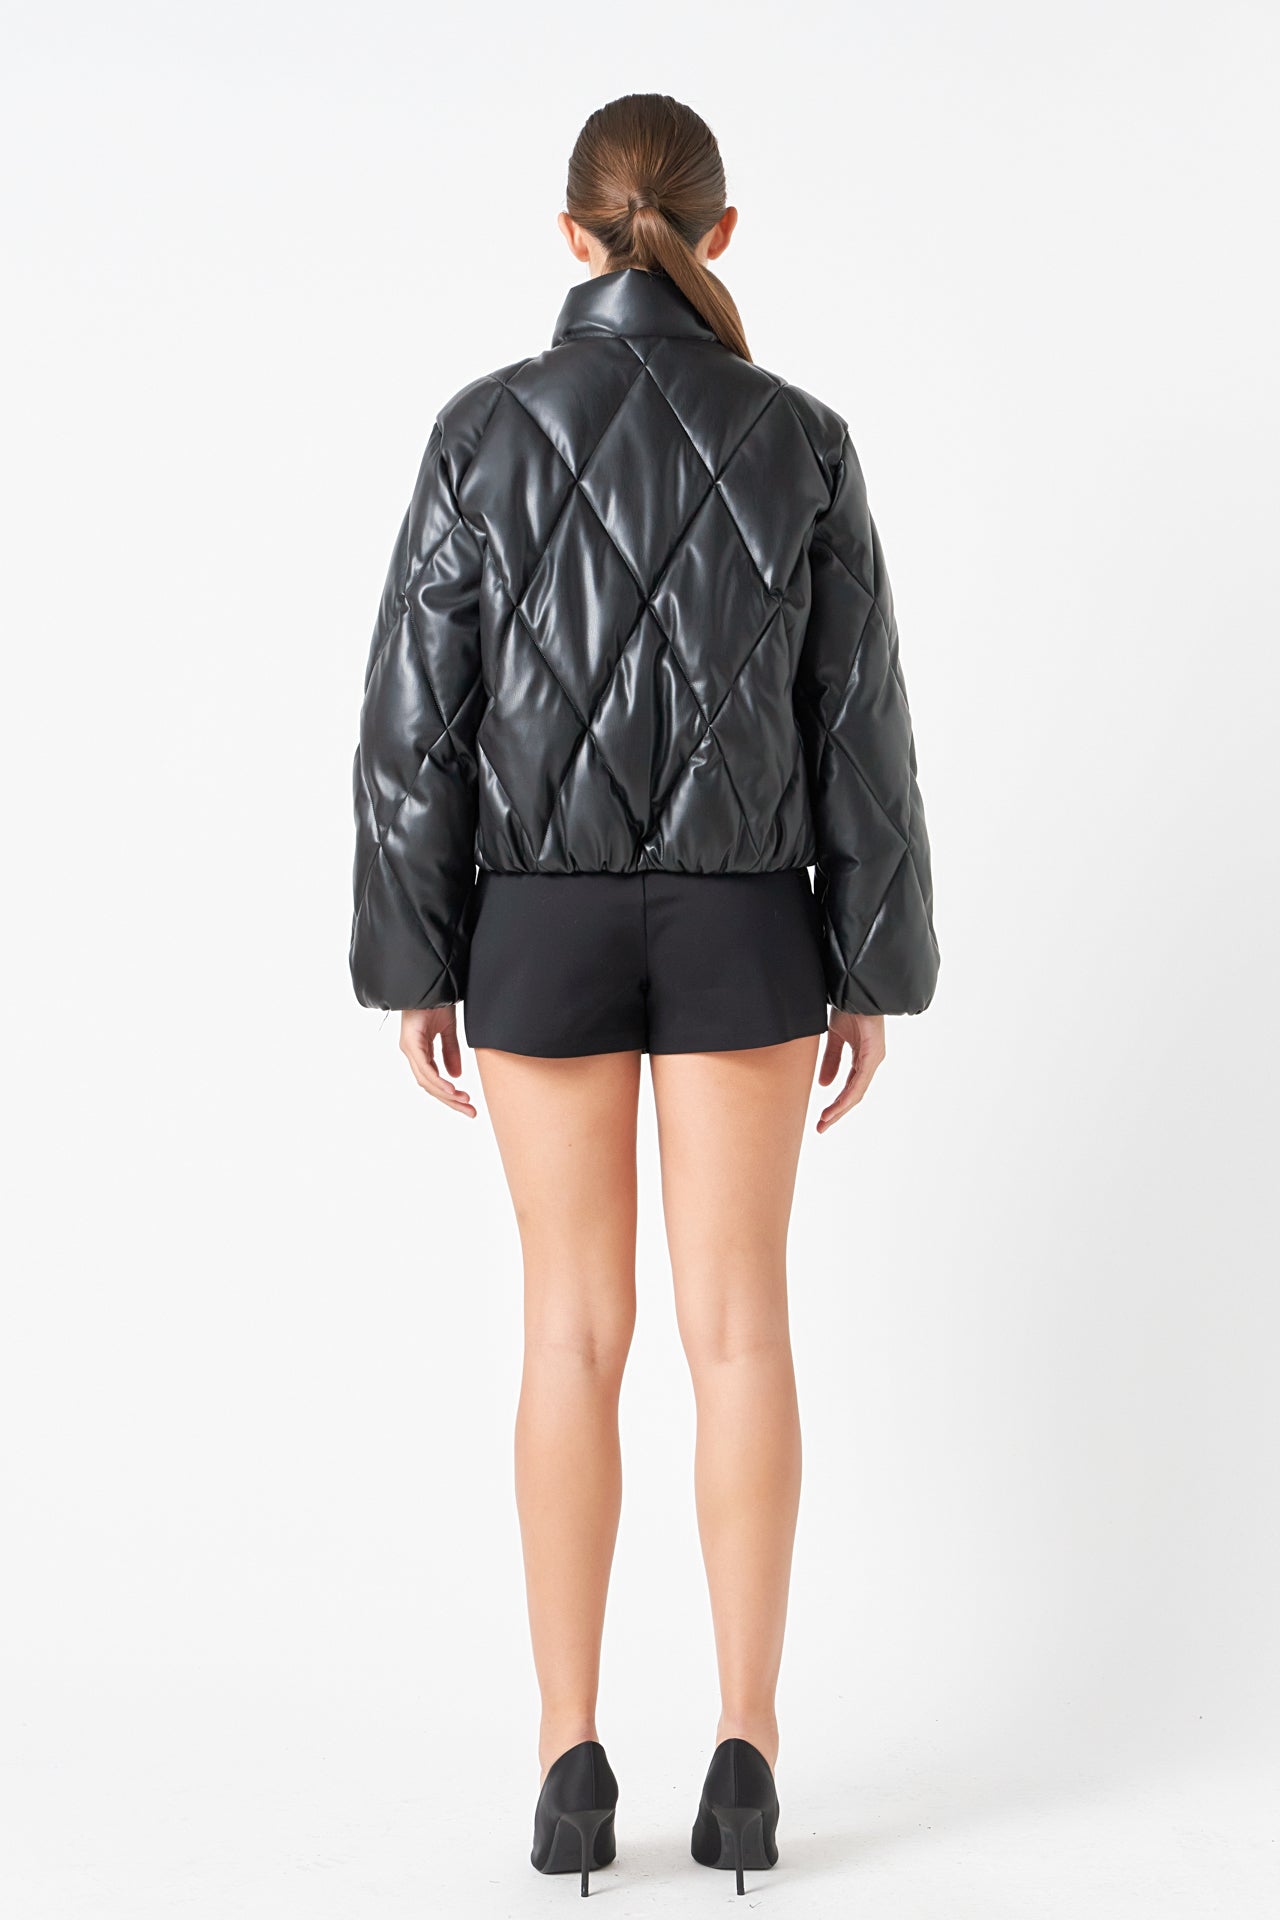 ENDLESS ROSE - Quilted PU Bomber - JACKETS available at Objectrare